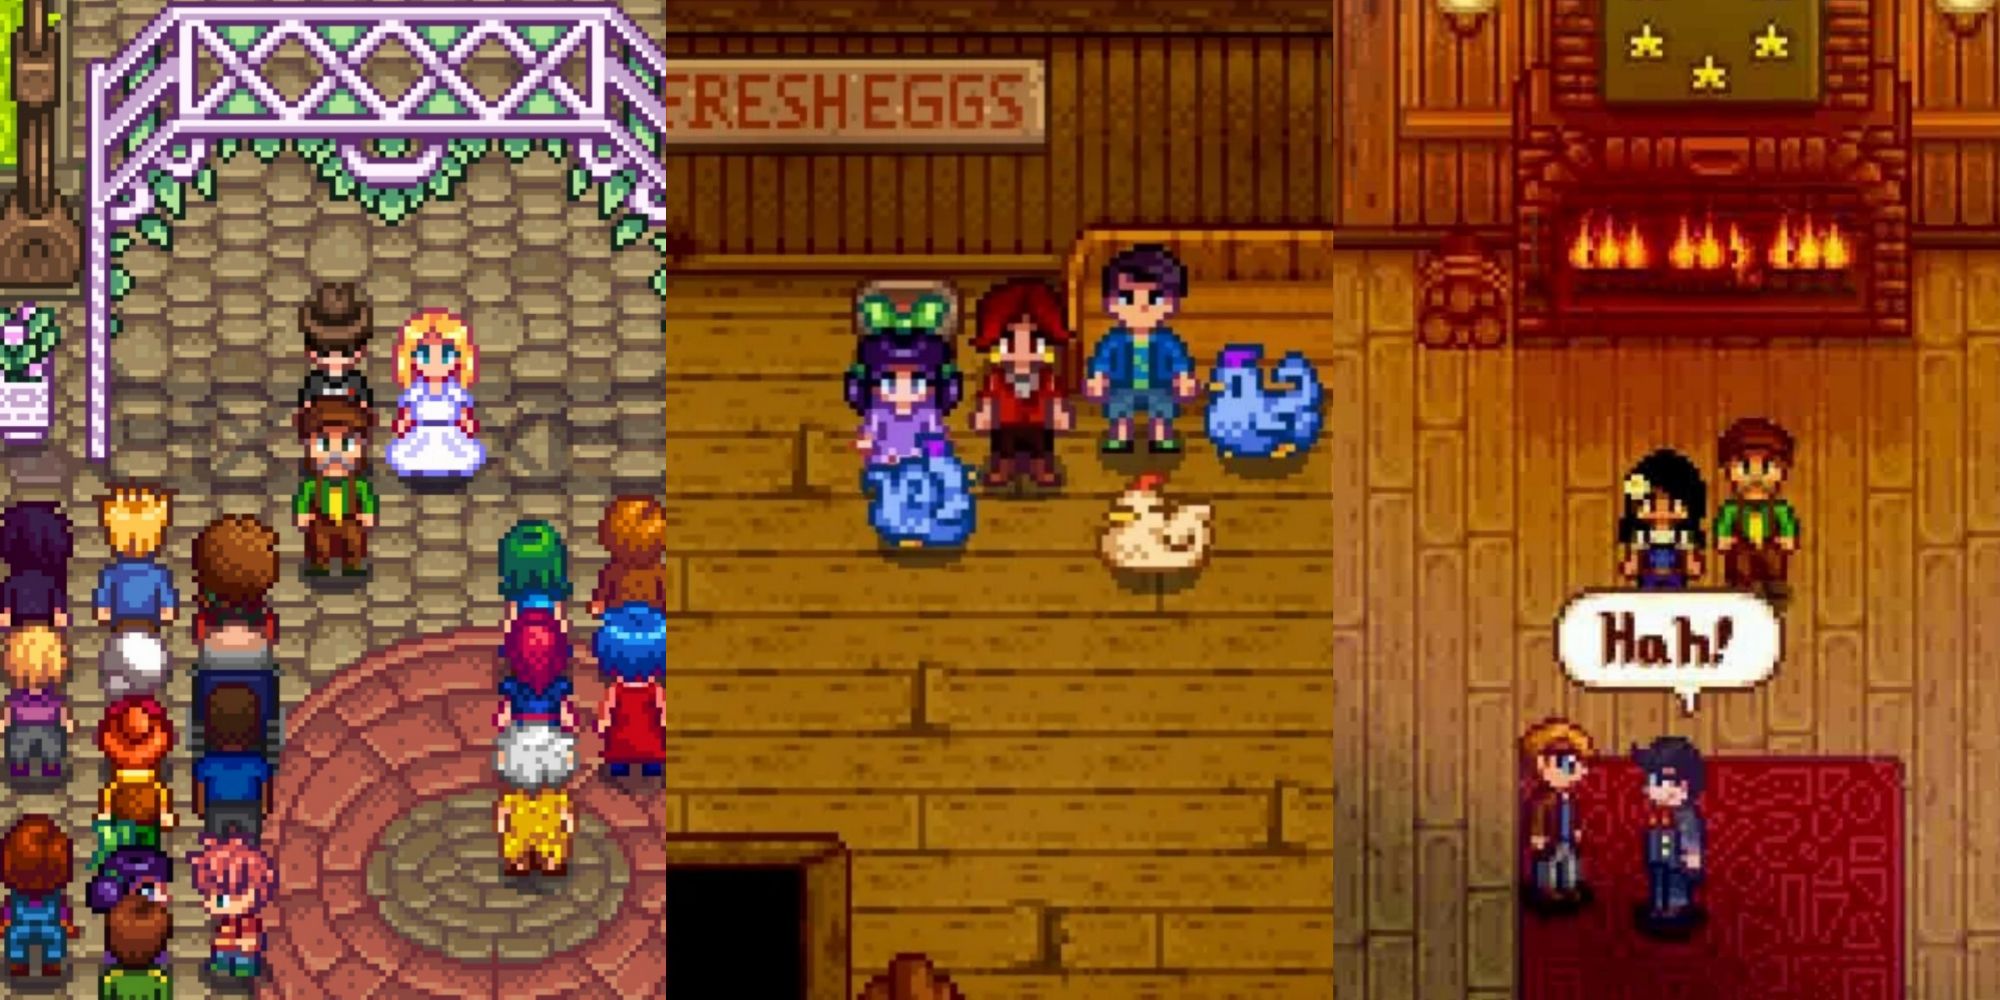 Three stardew valley images of different cutscenes, one of a wedding, one of shane's barn, and one of the inside of the community center